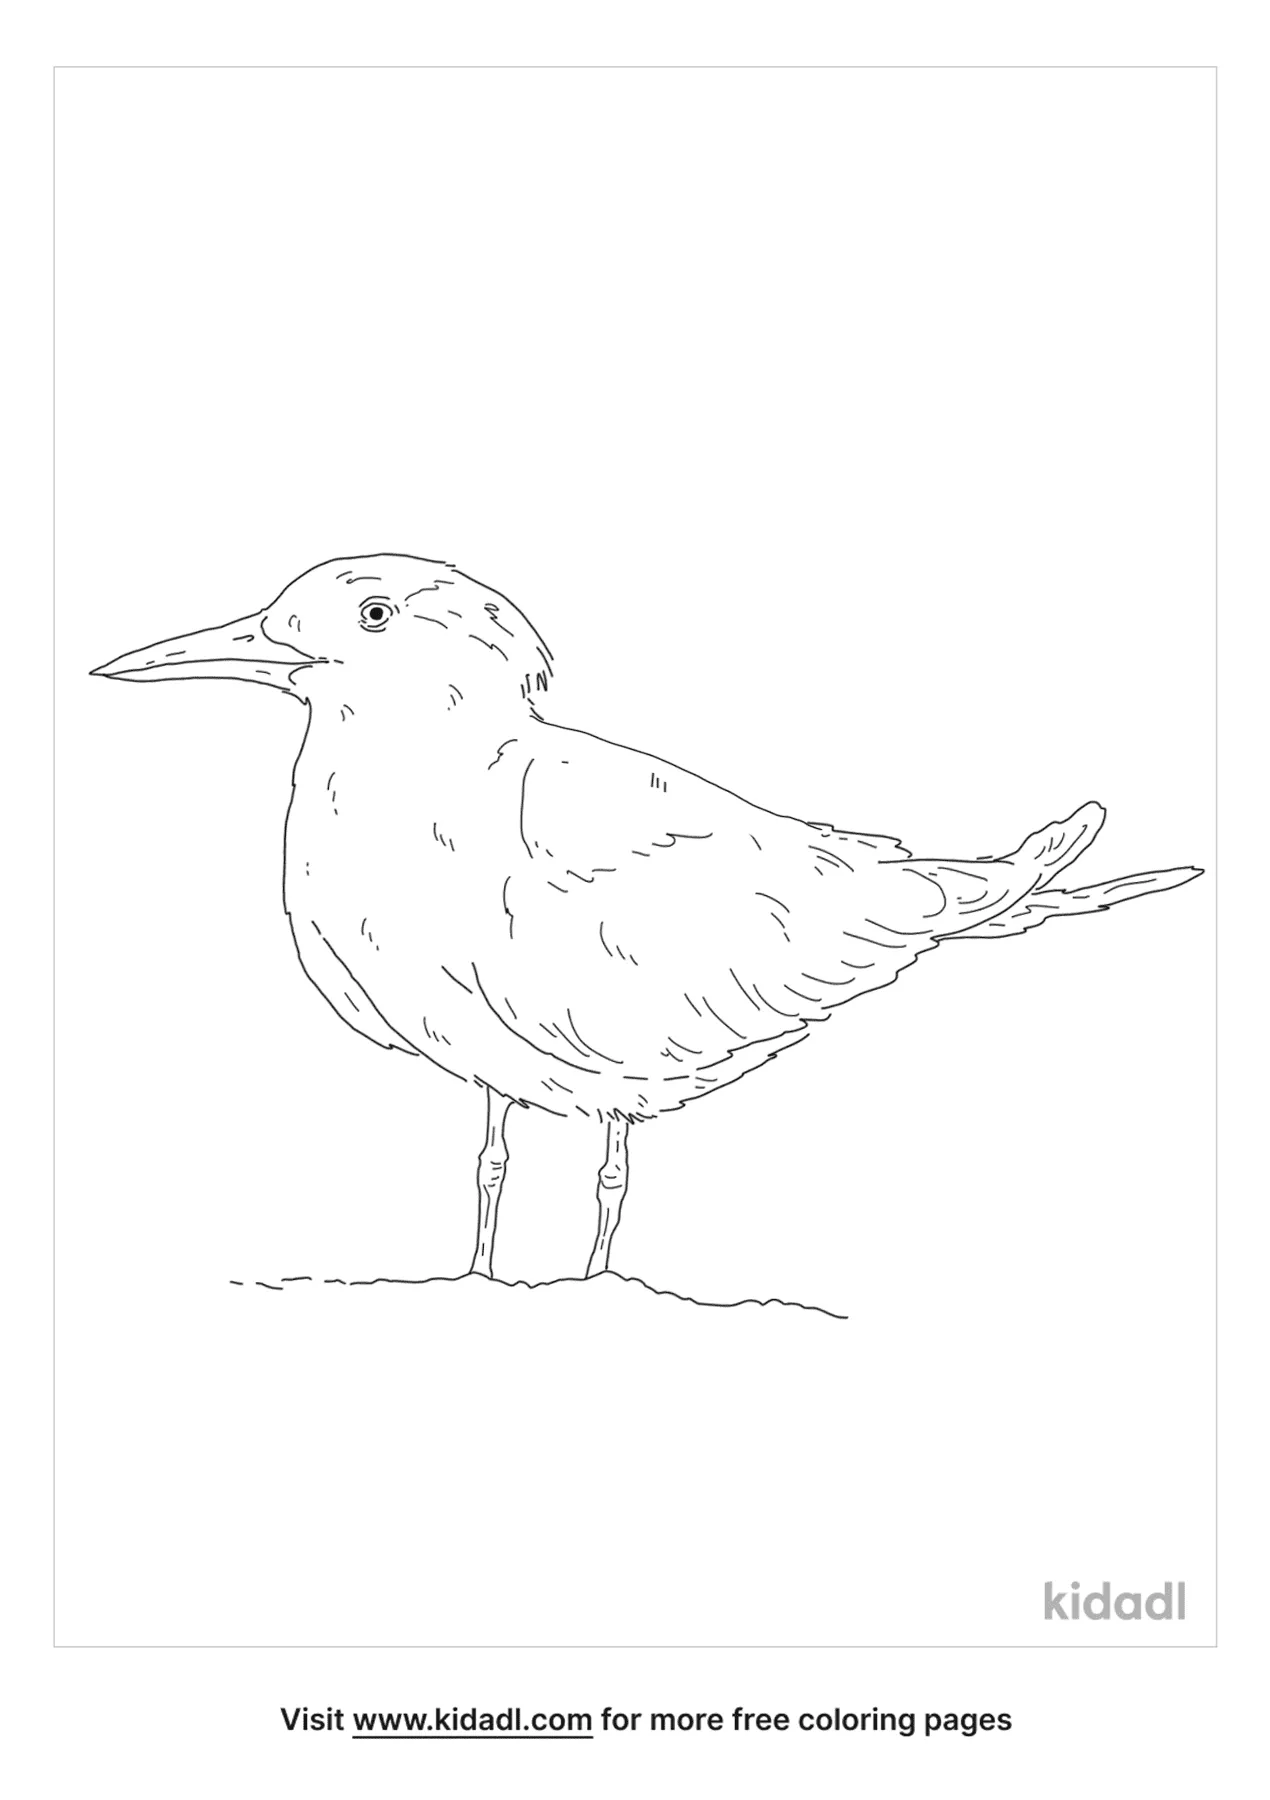 Gull-Billed Tern Coloring Page